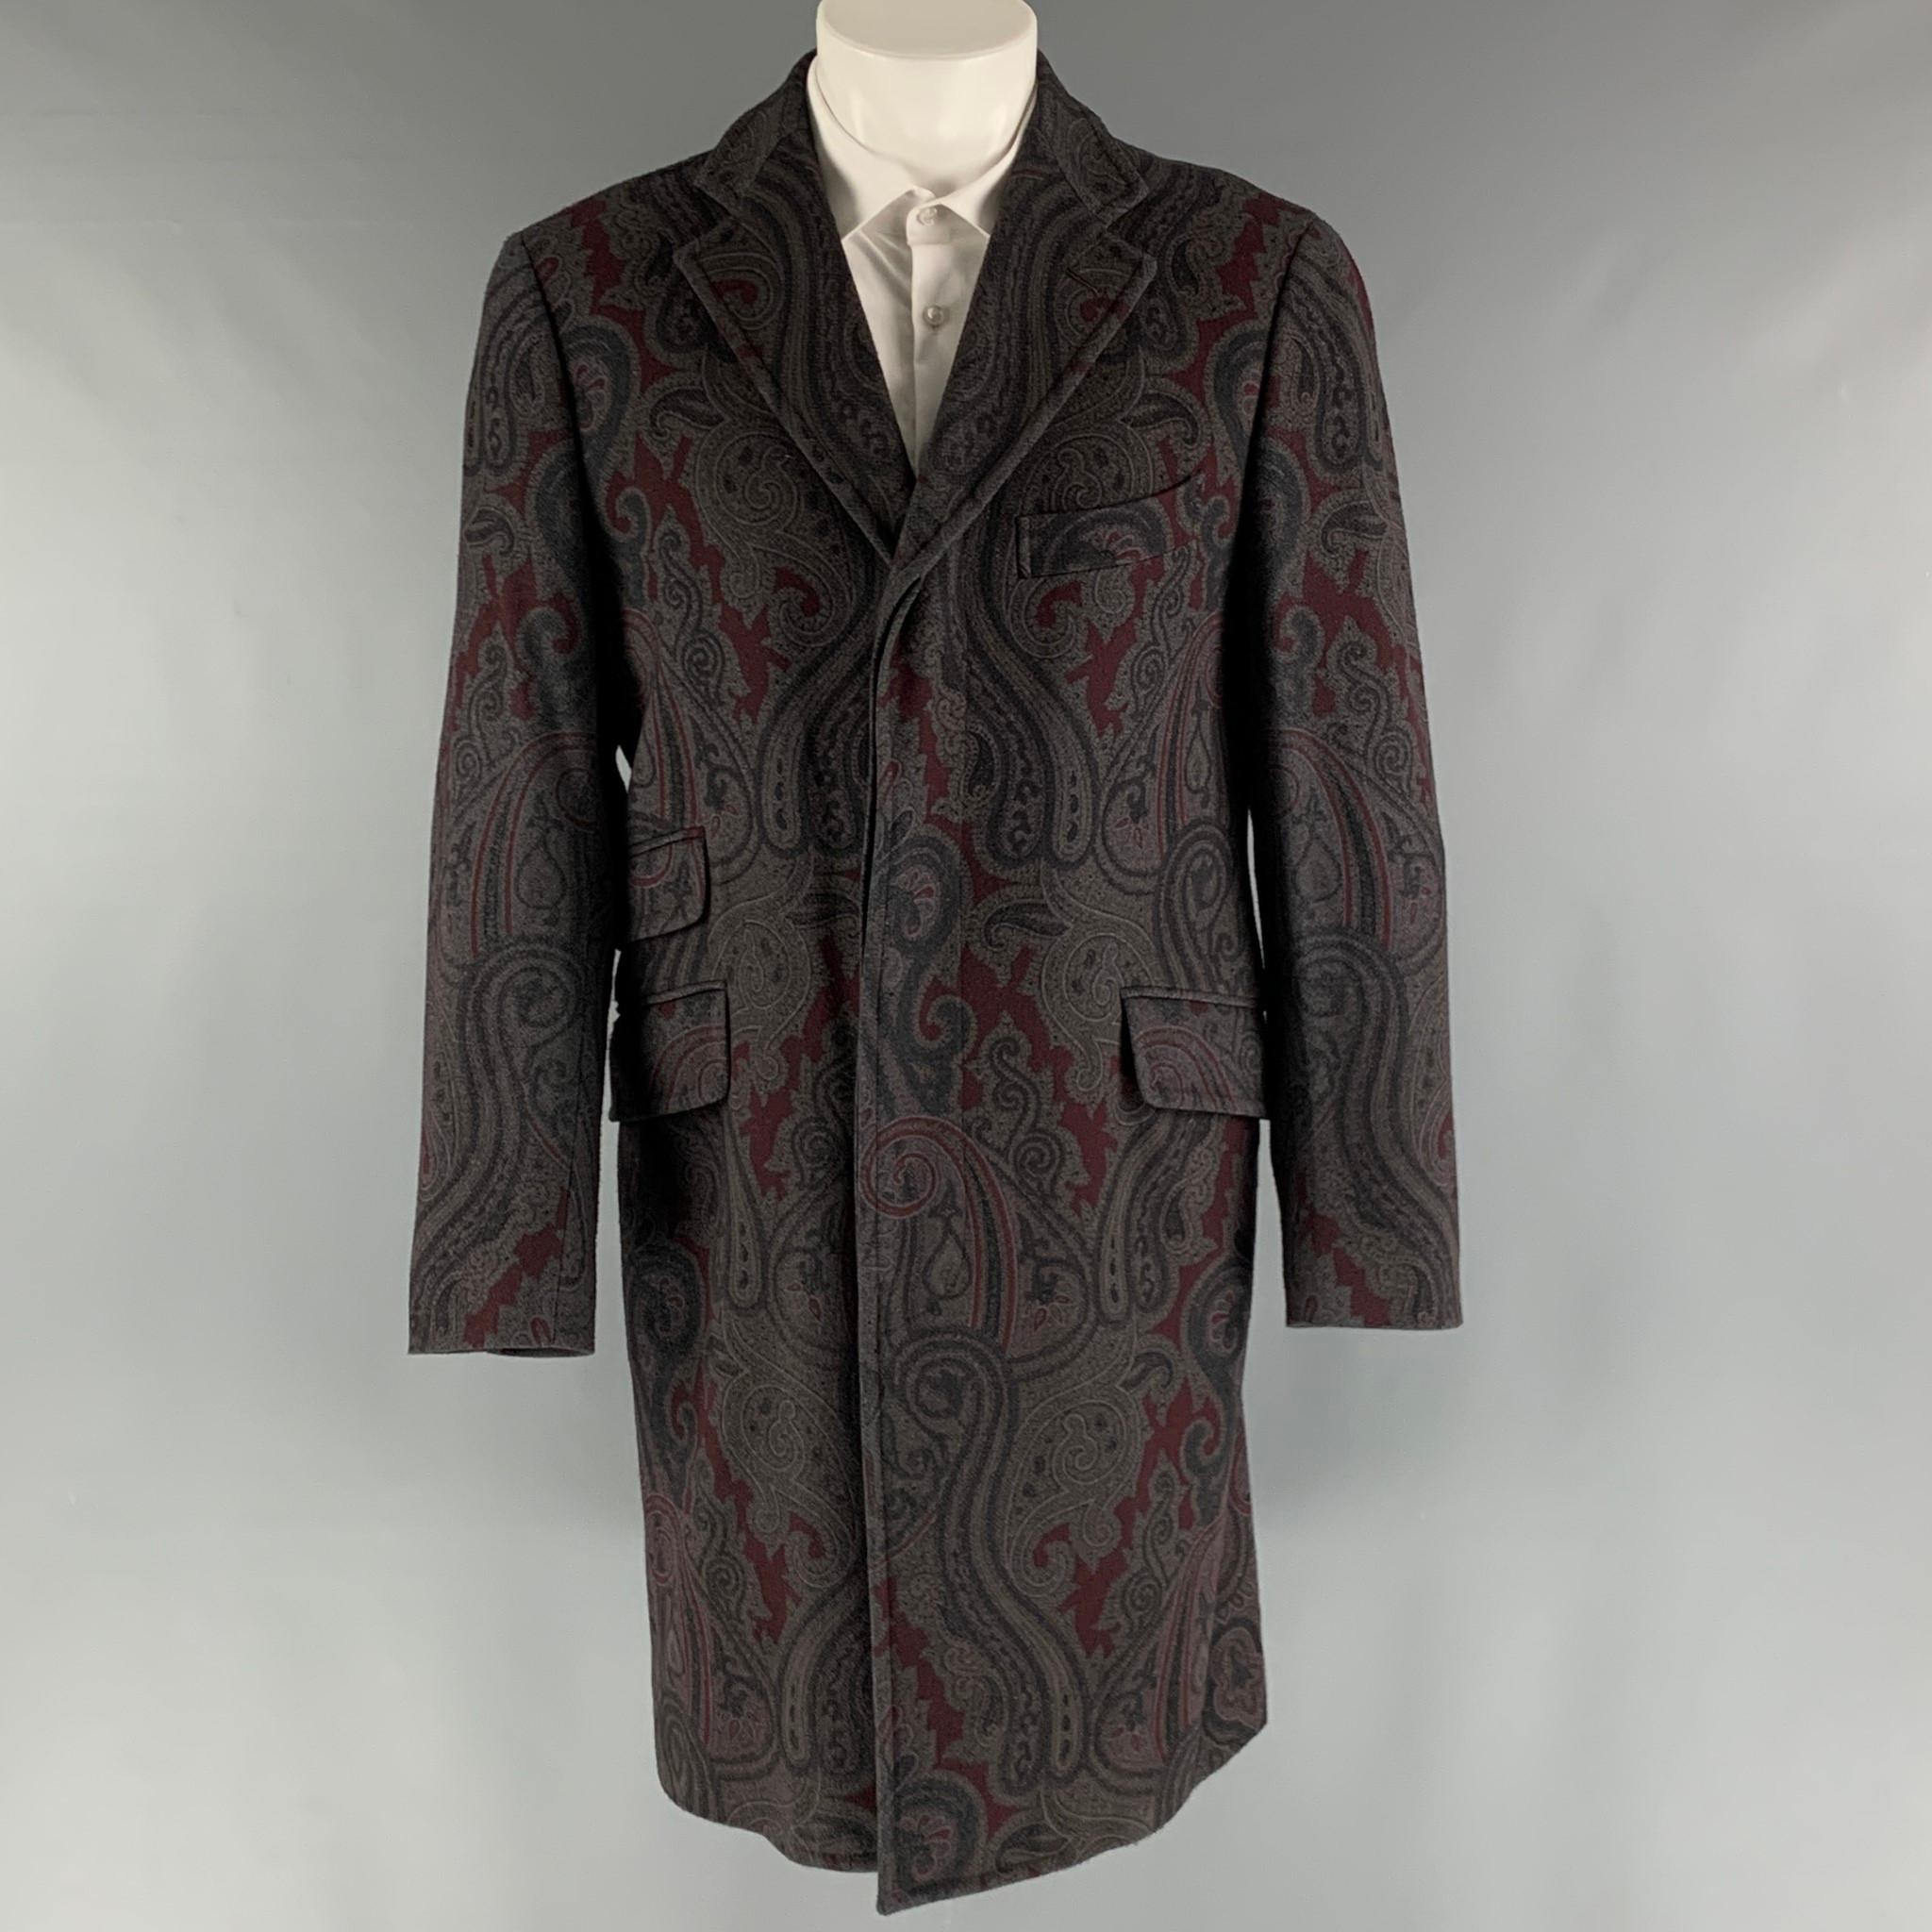 ETRO coat comes in a grey and burgundy wool and polyamide woven material with a full liner featuring a paisley motif, notch lapel, flap pockets, single back vent, and a button closure. Made in Italy.

Excellent Pre-Owned Condition.
Marked: